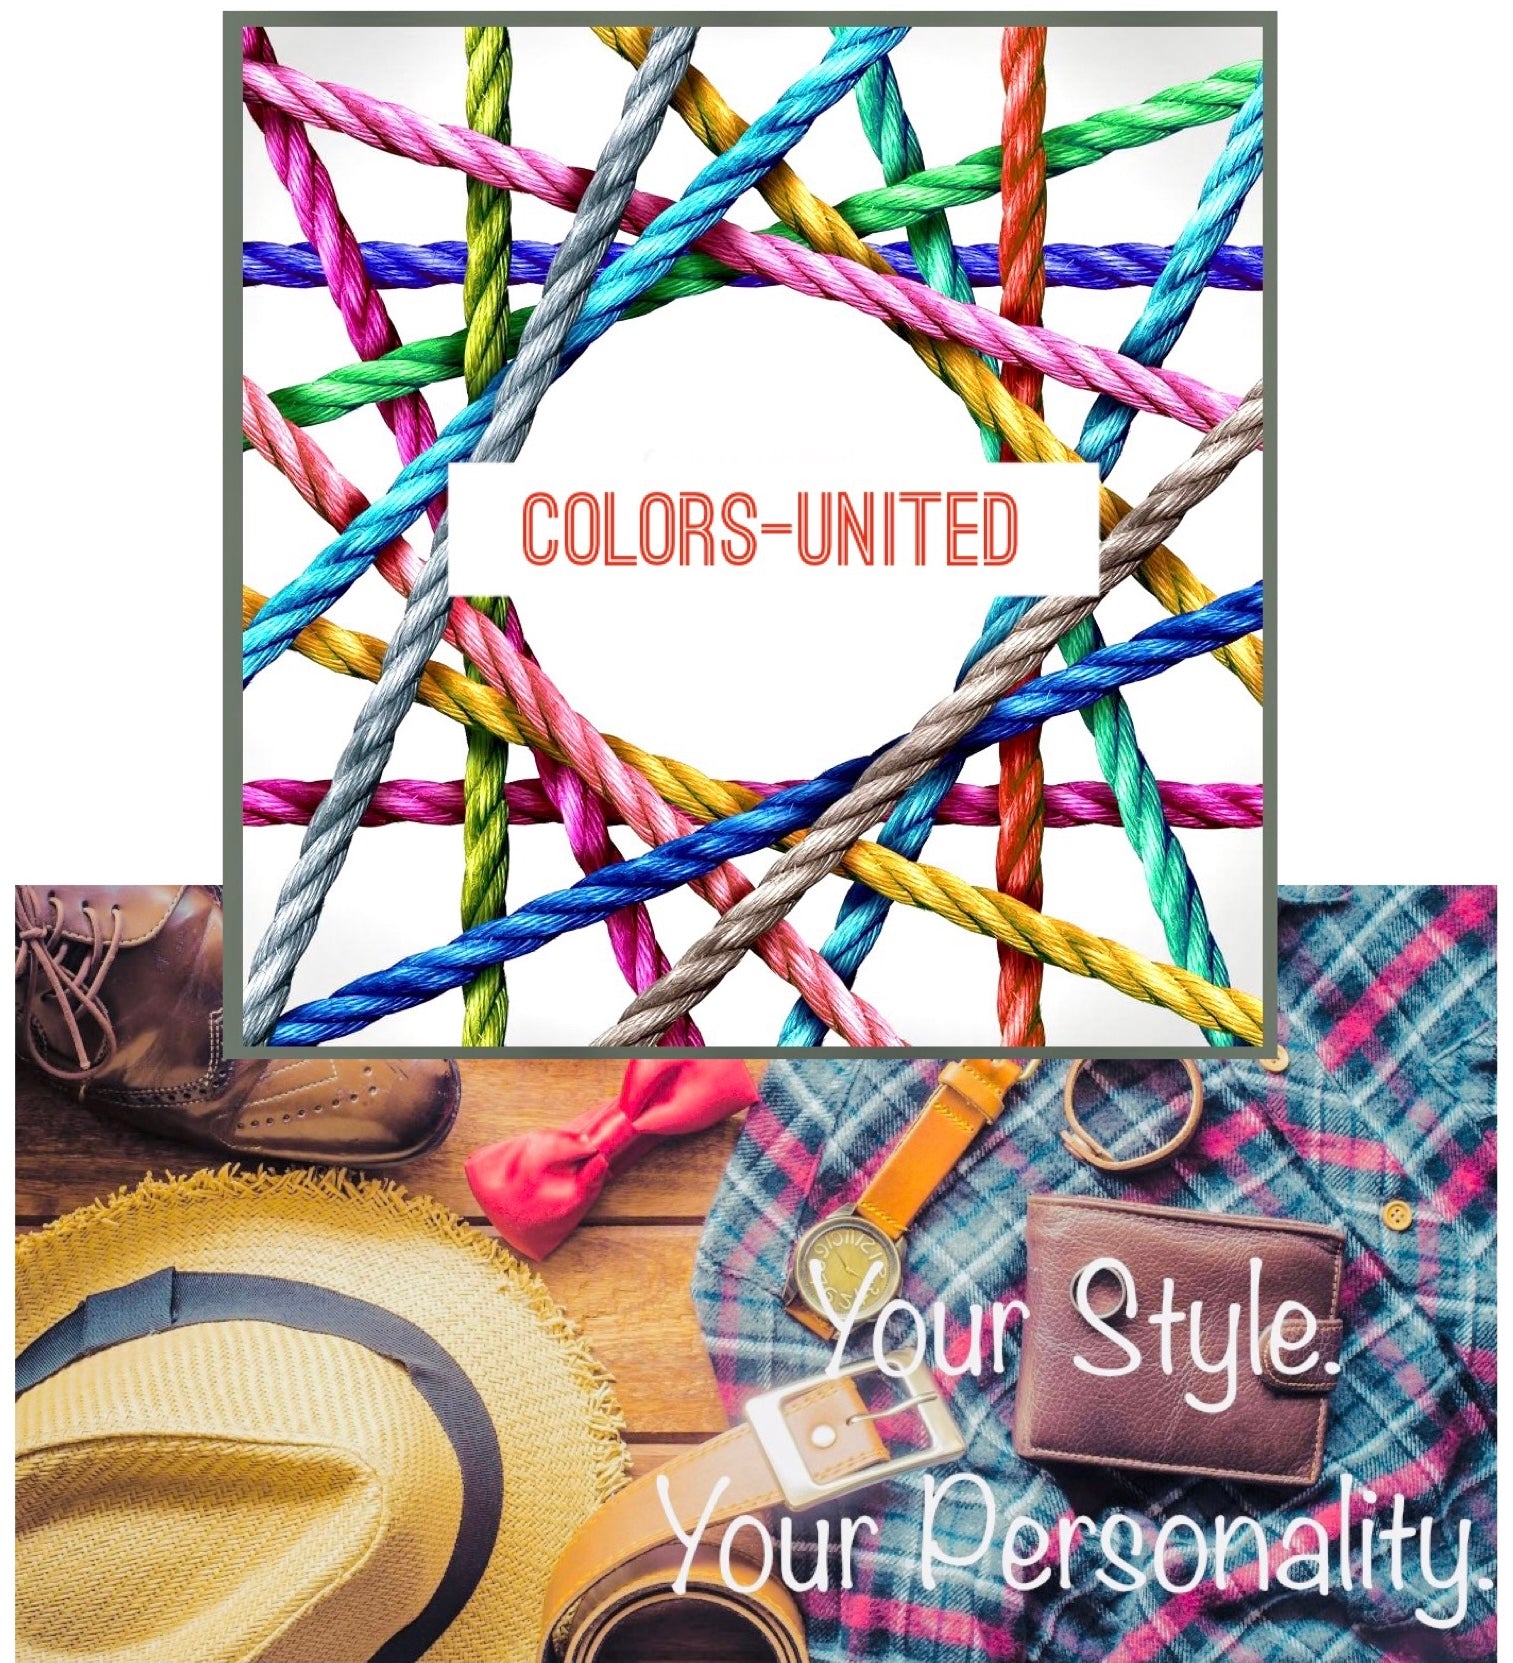 Colors-United for Your Style and Personality – COLORS UNITED